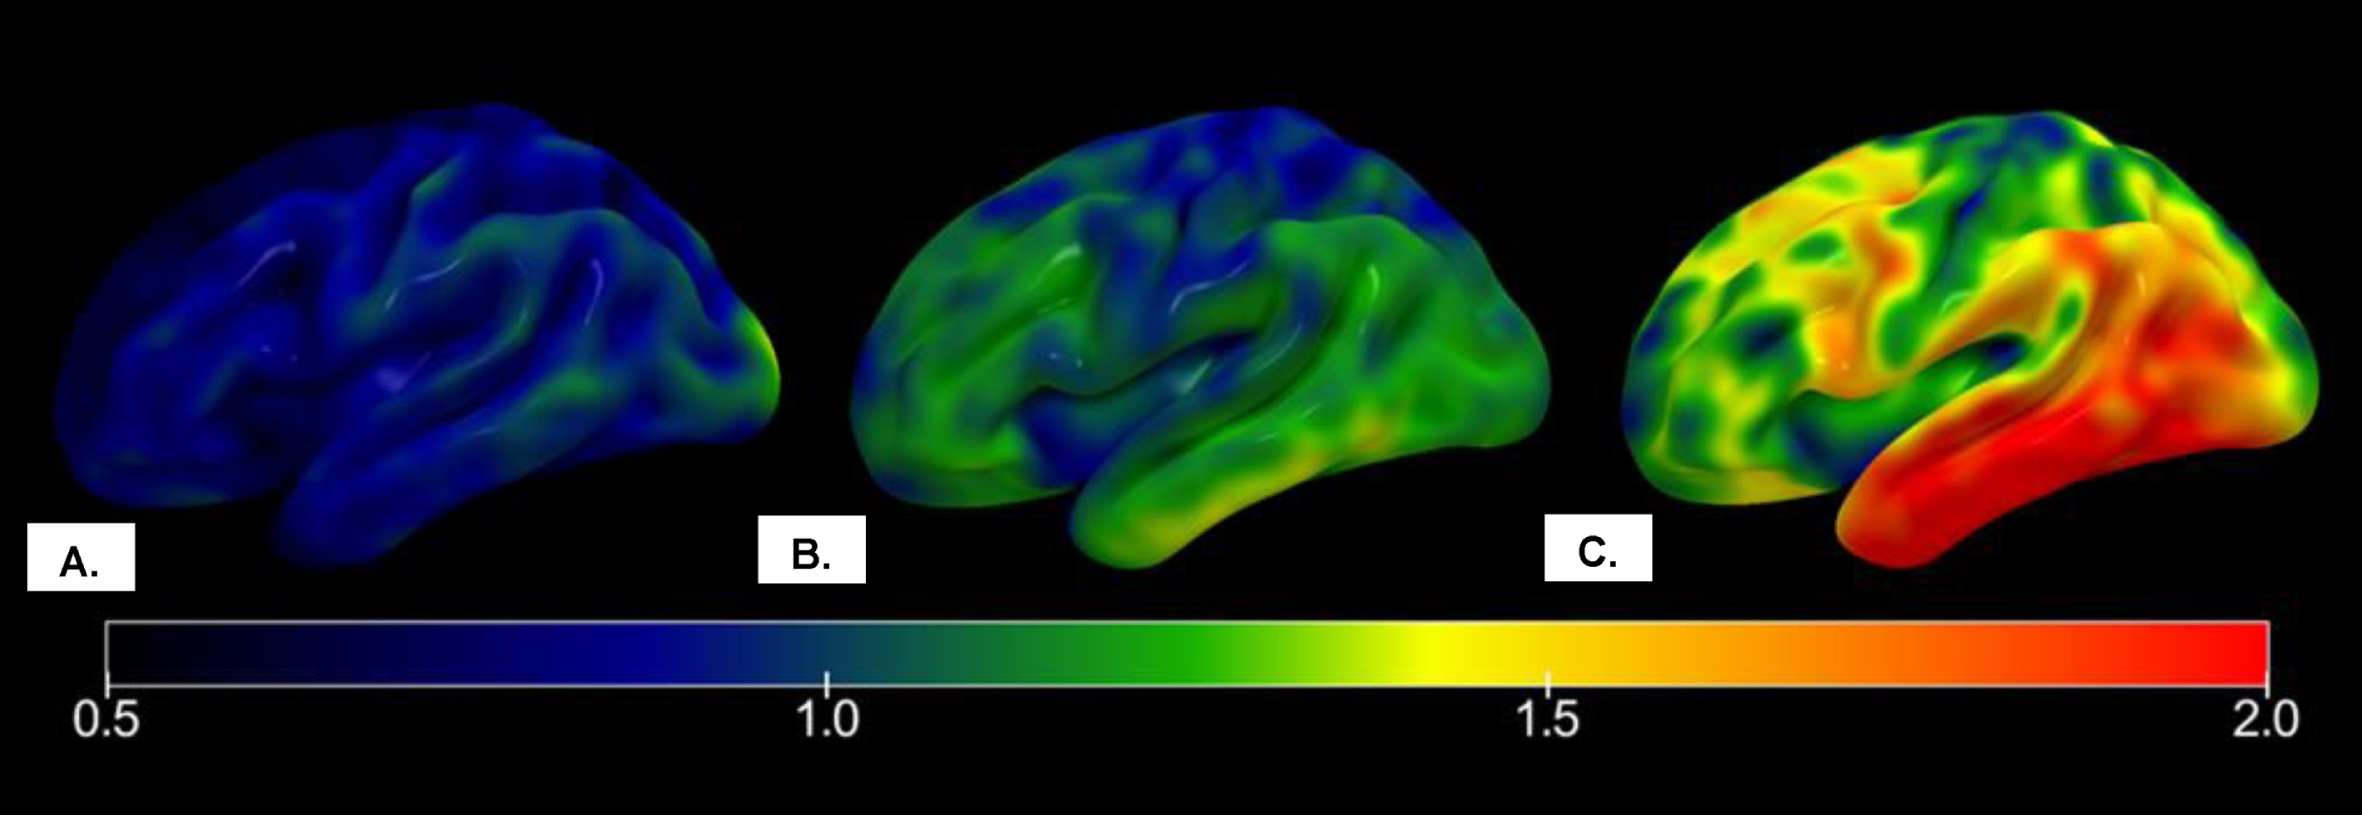 Mean right hemispheric 18F-Flortaucipir SUVR maps of participants with normal cognition, mild cognitive impairment, and Alzheimer’s disease in ADNI. A) Tau maps for a participant classified as T– by both TOC and Chen pathologic staging schemes. B) Tau map for participant classified as T+ by Chen staging scheme but T– by TOC staging scheme. C) Tau map for participant classified as T+ by both TOC and Chen staging schemes. SUVR, standardized uptake value ratio; ADNI, Alzheimer’s Disease Neuroimaging Initiative.